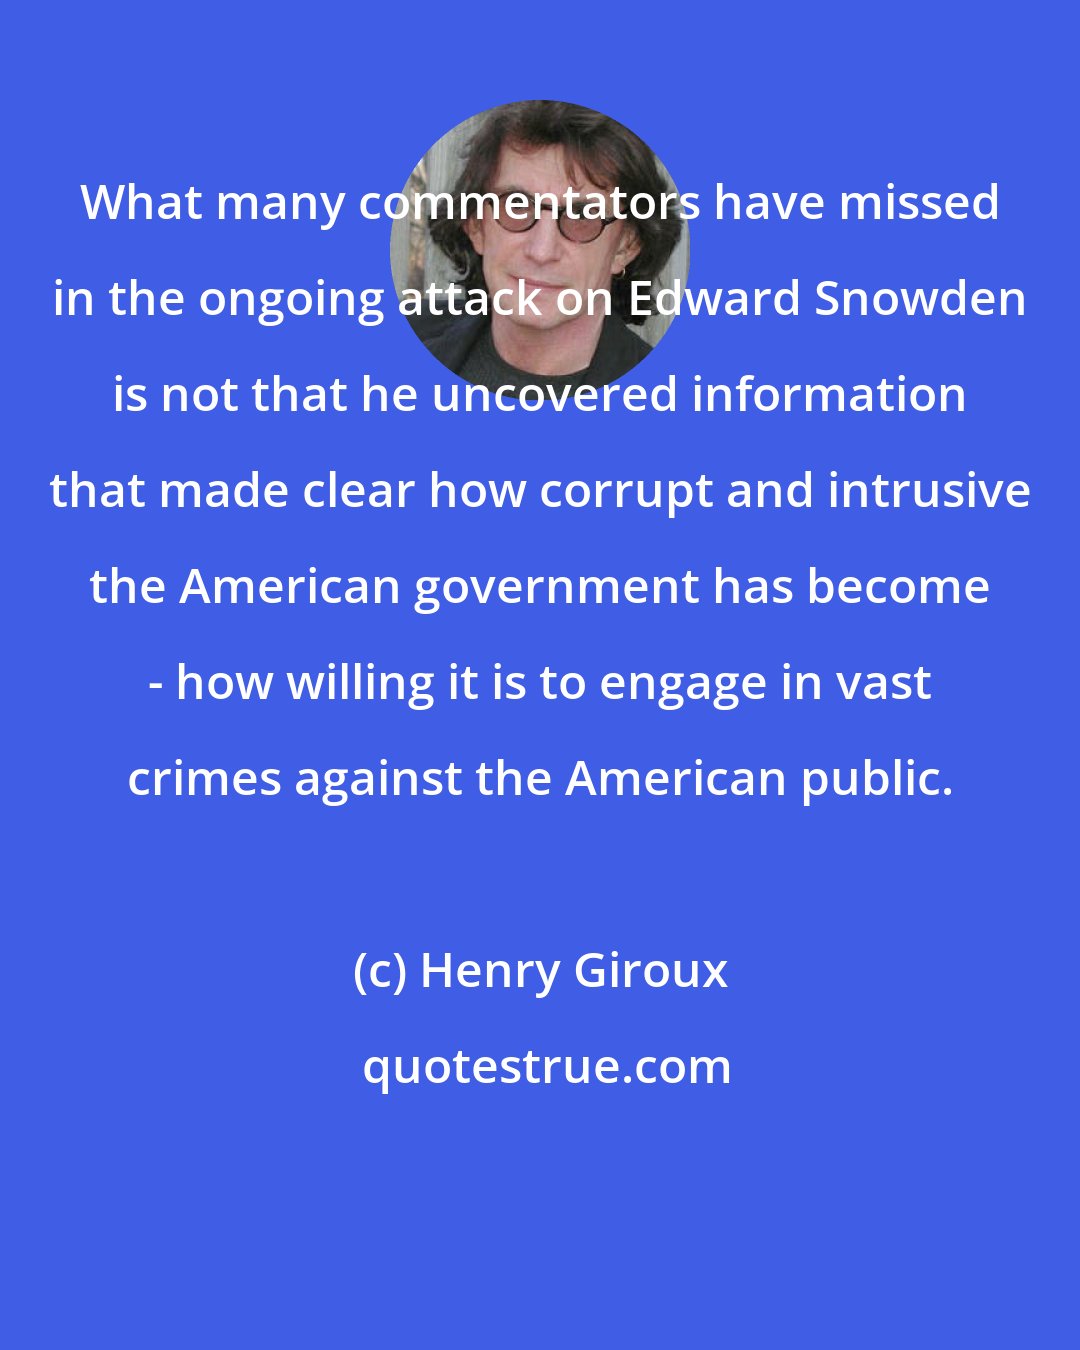 Henry Giroux: What many commentators have missed in the ongoing attack on Edward Snowden is not that he uncovered information that made clear how corrupt and intrusive the American government has become - how willing it is to engage in vast crimes against the American public.